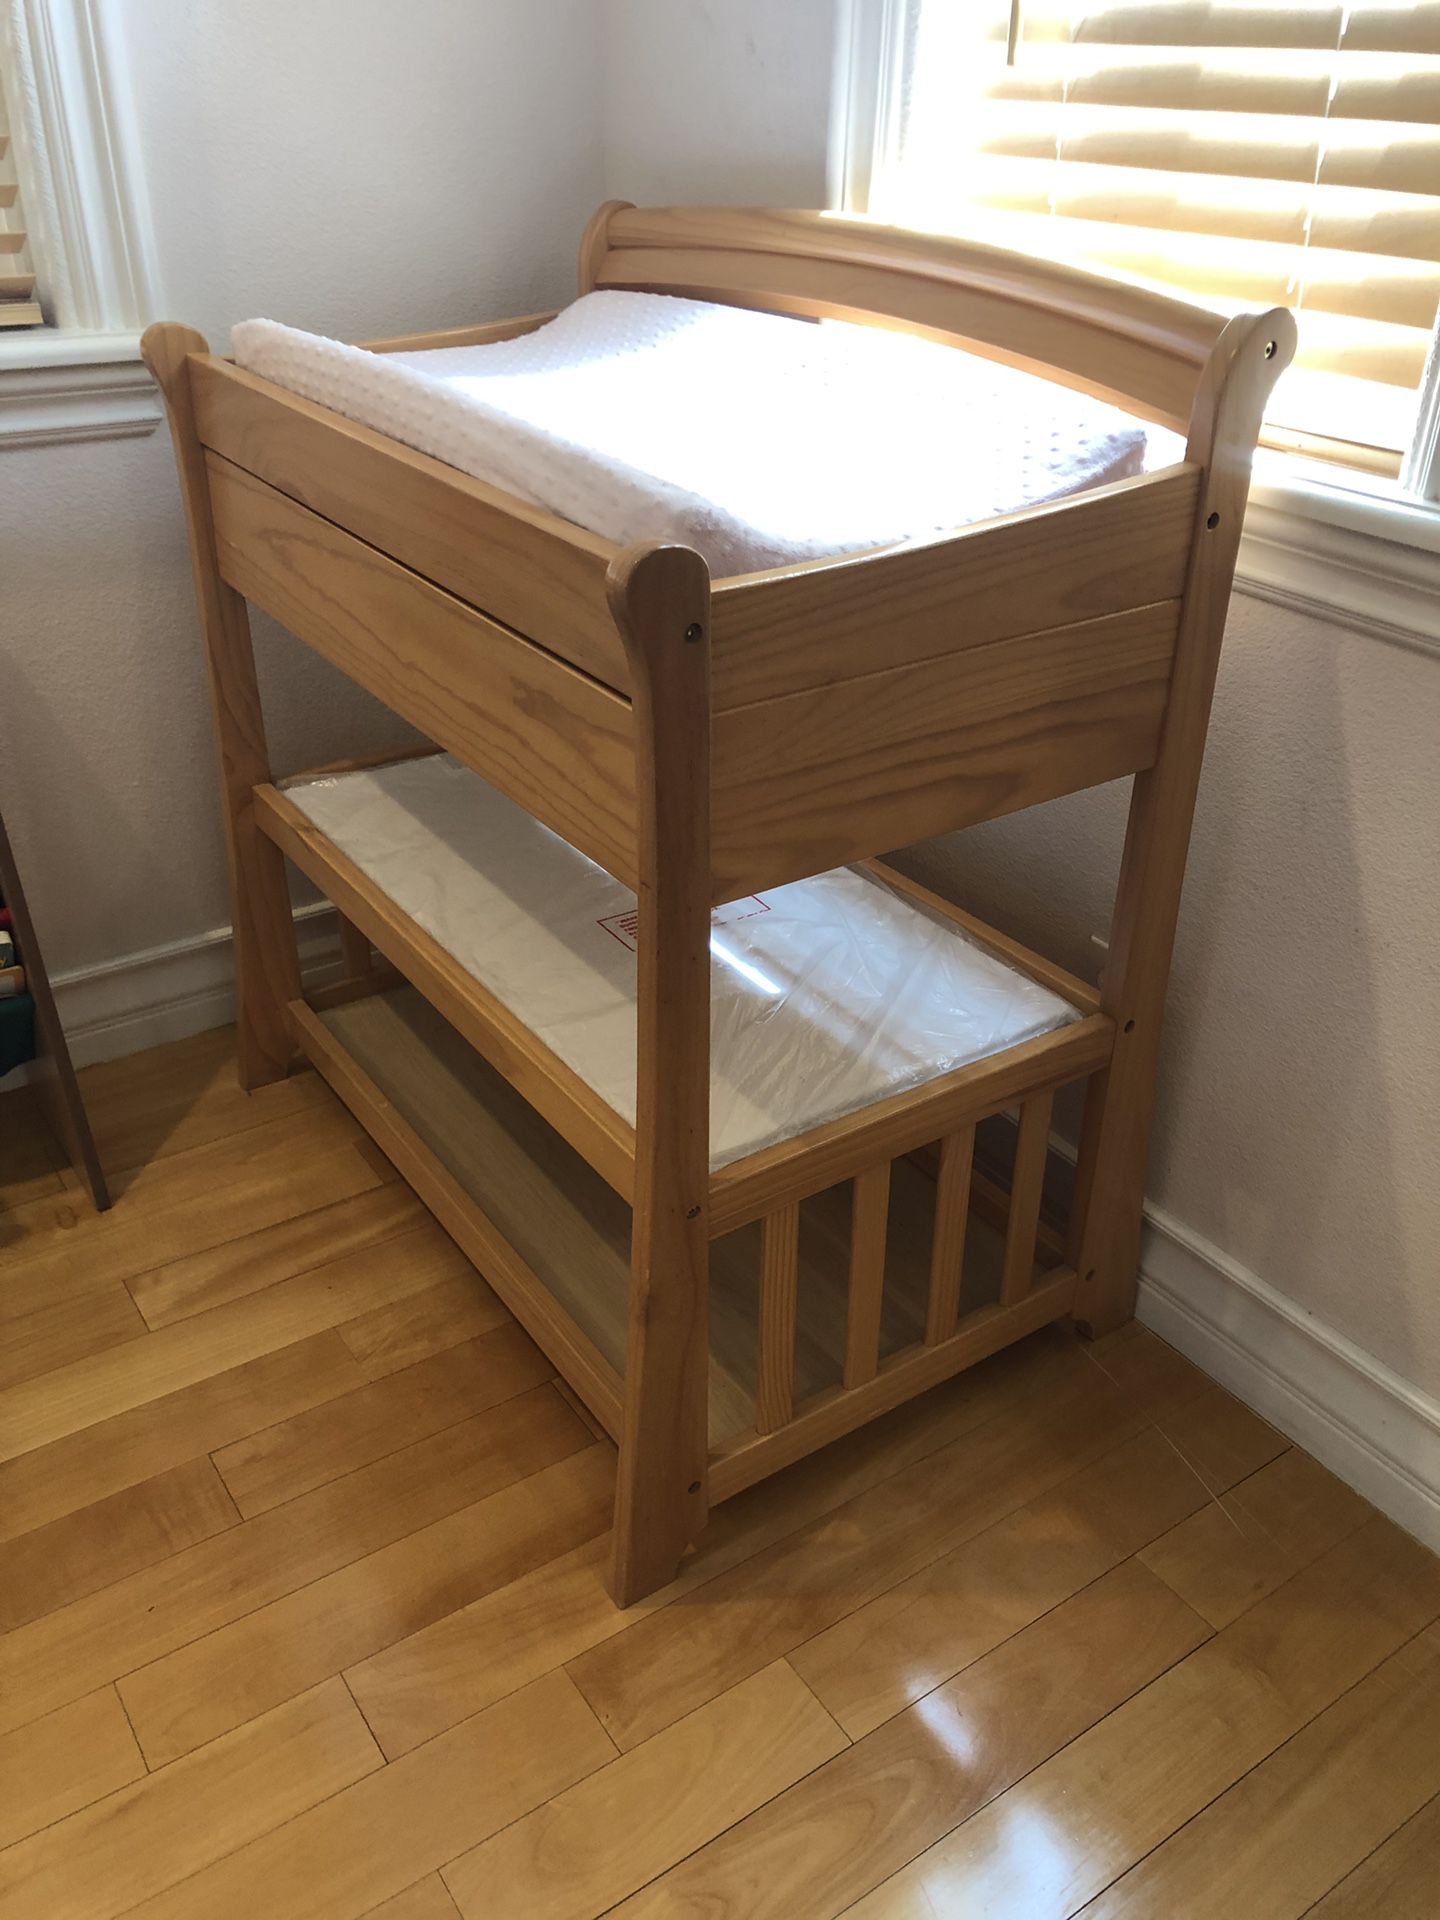 Diaper changing table with pad and pad-cover